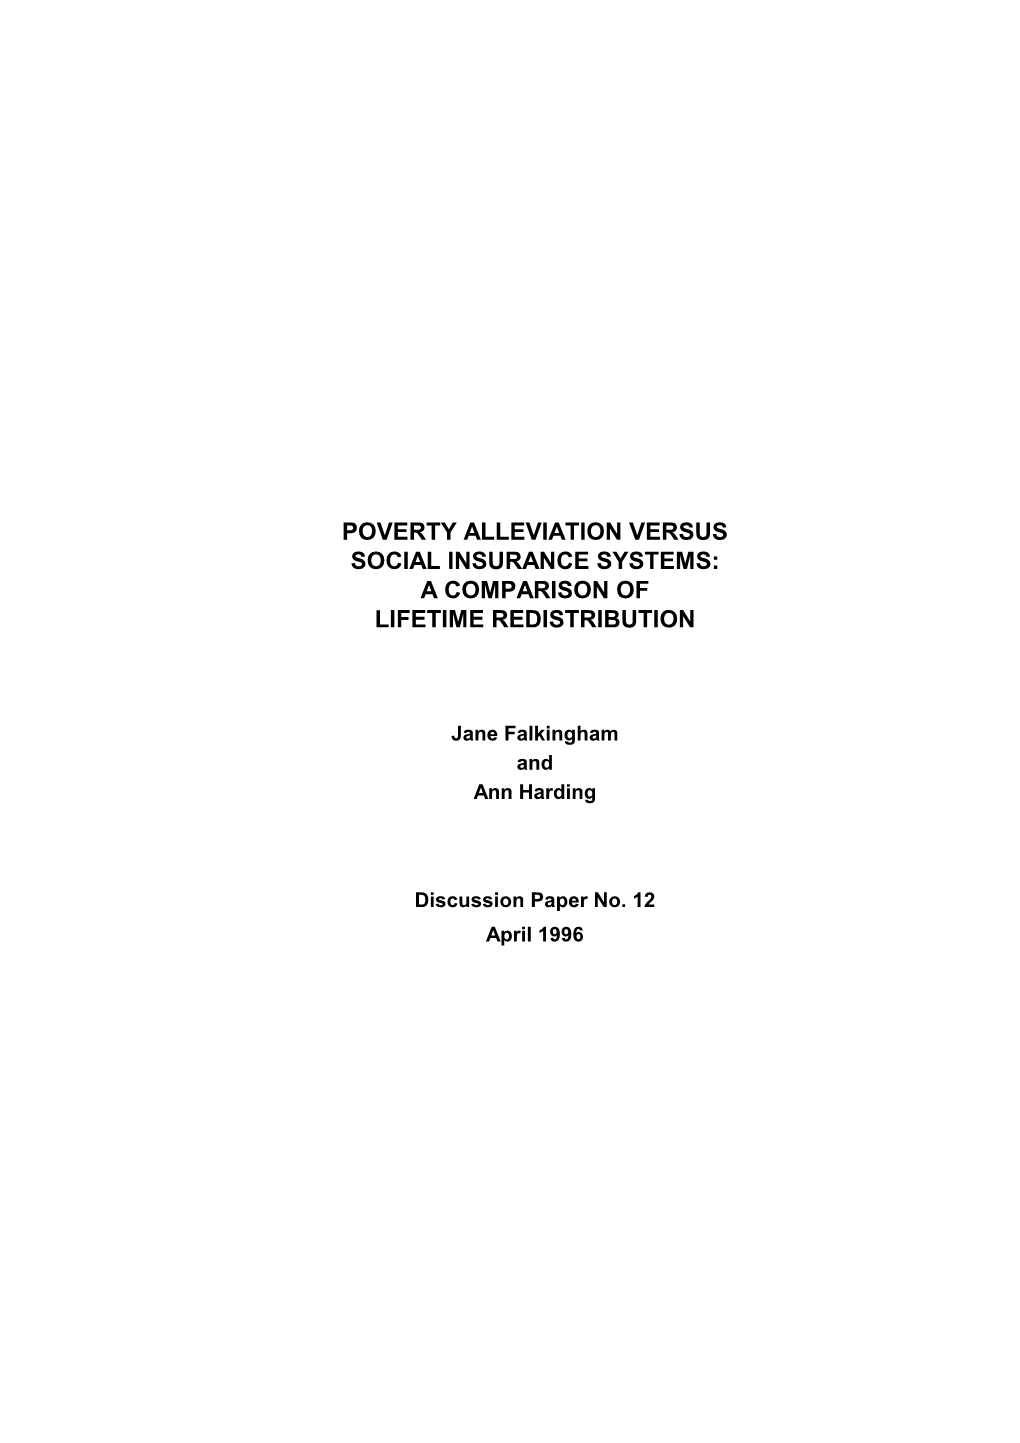 Poverty Alleviation Versus Social Insurance Systems: a Comparison of Lifetime Redistribution